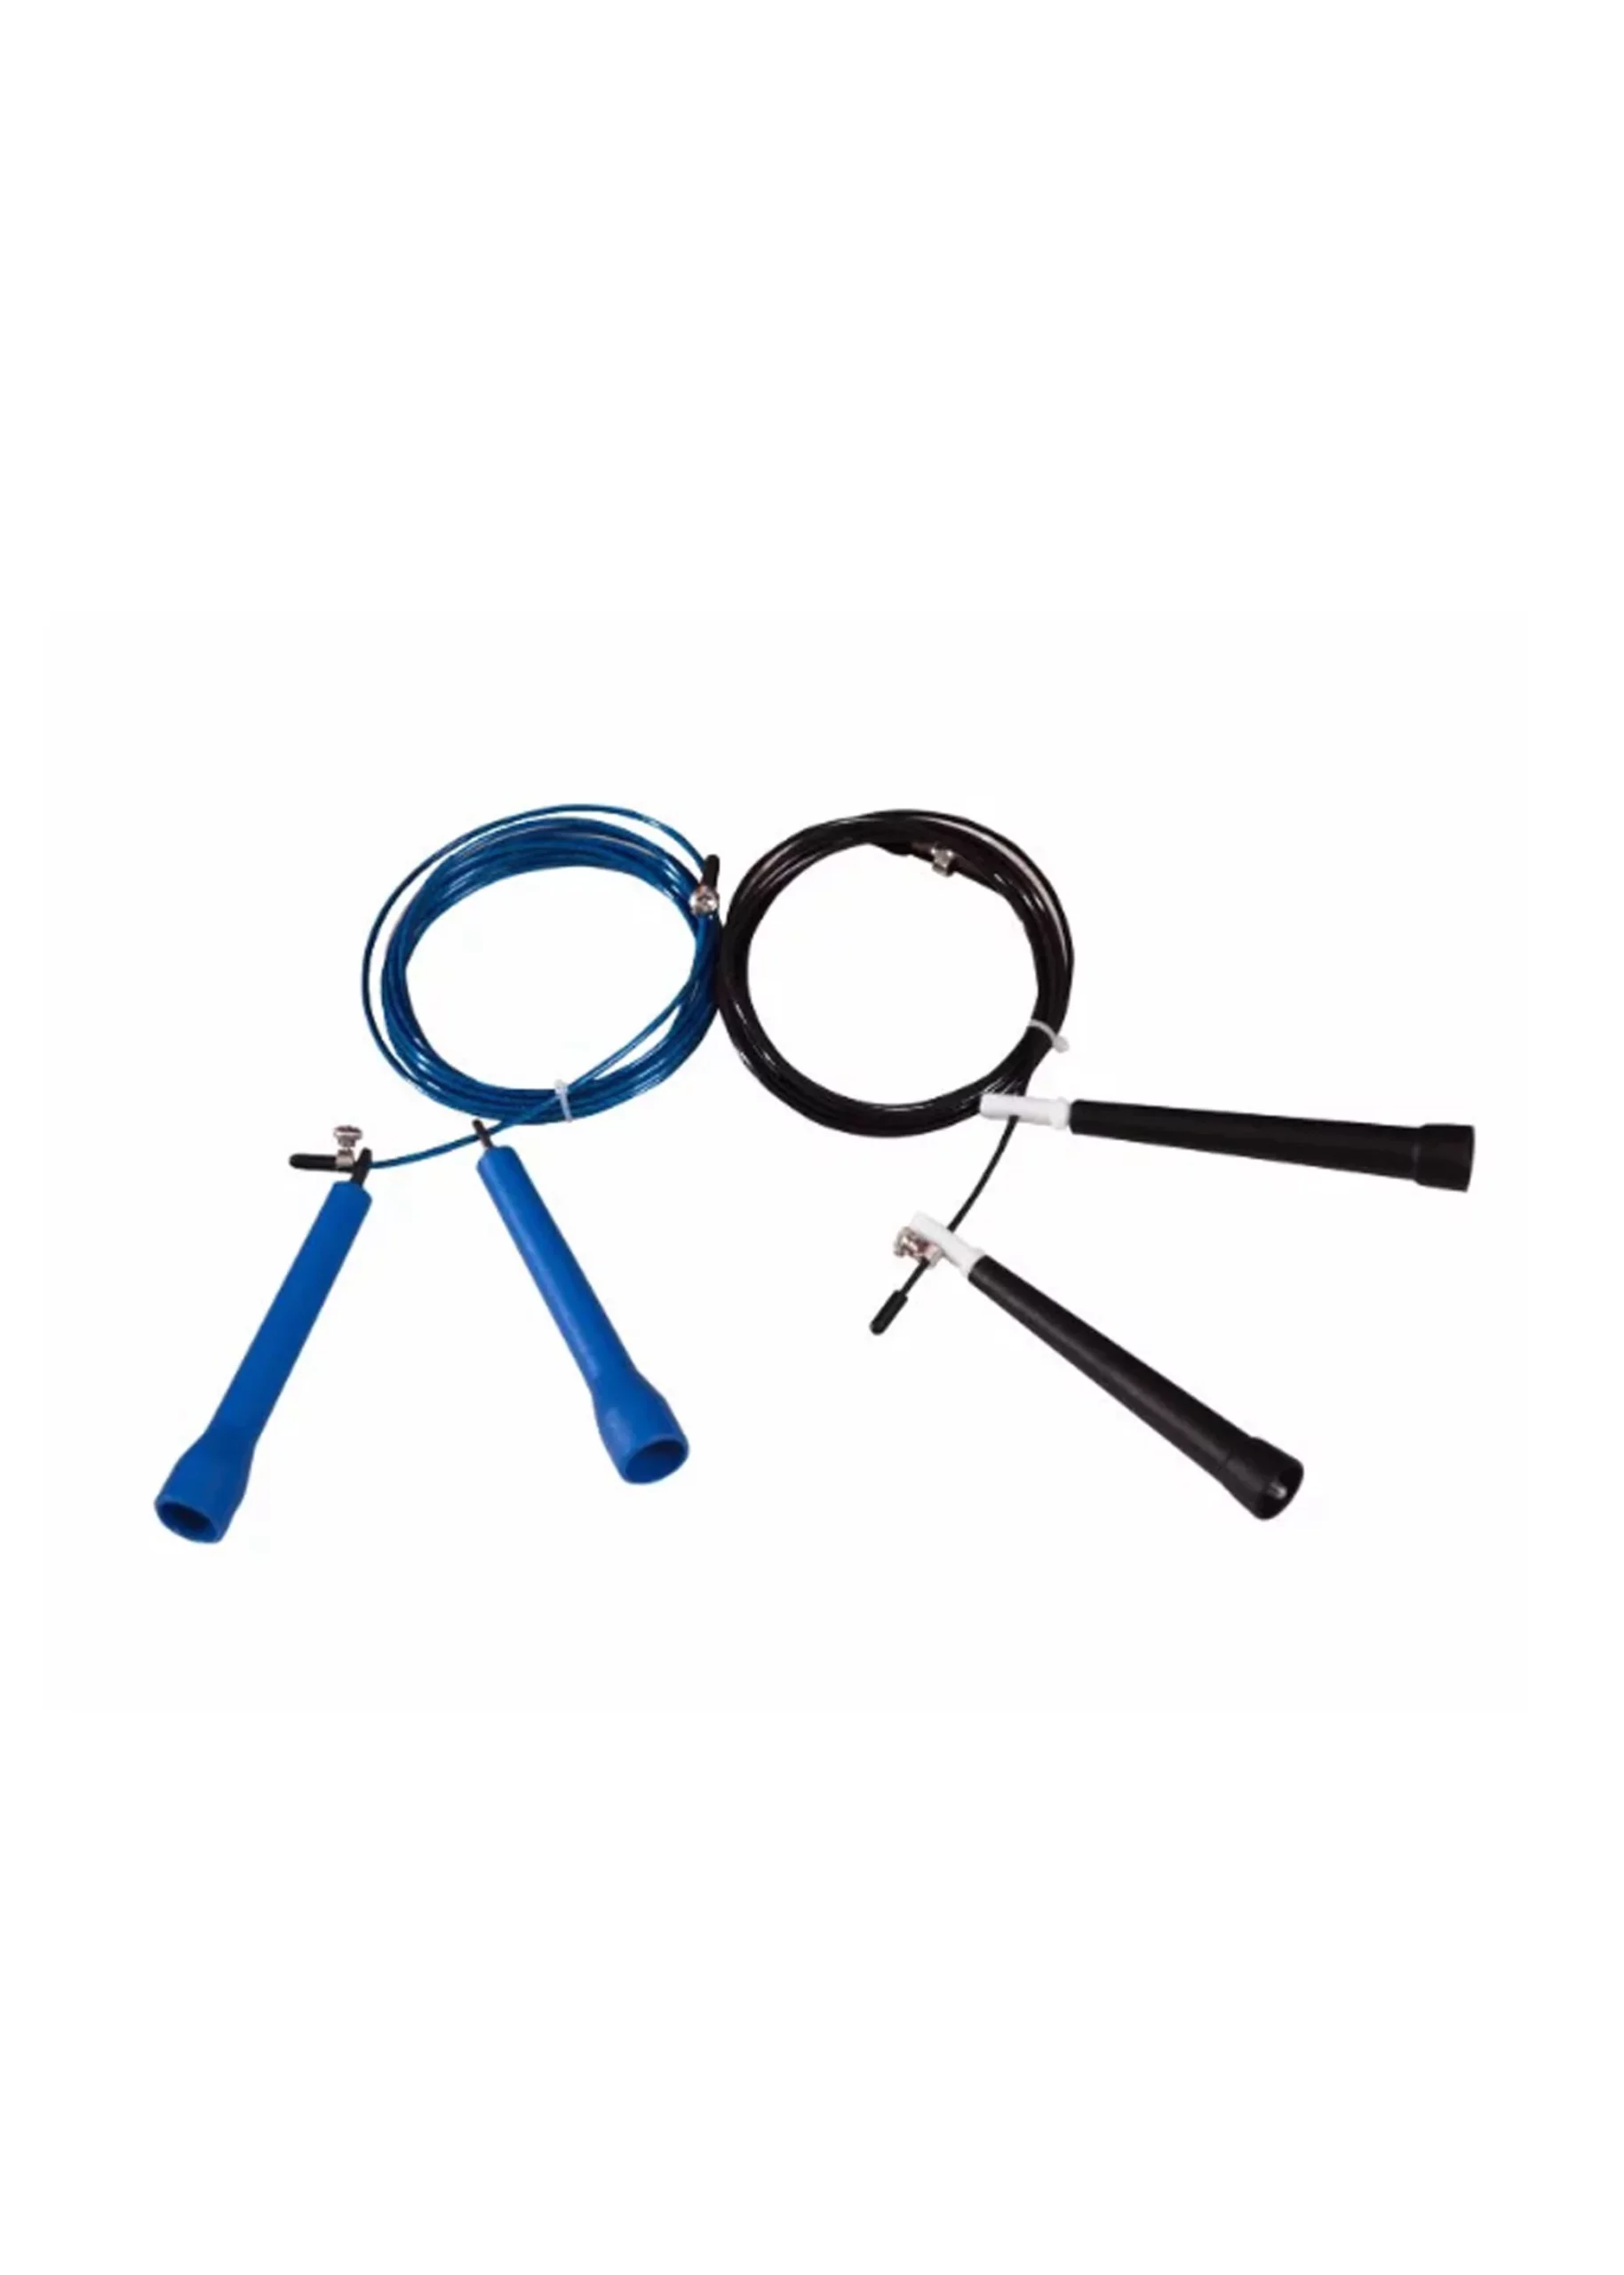 Speed Jump Rope with Bearing